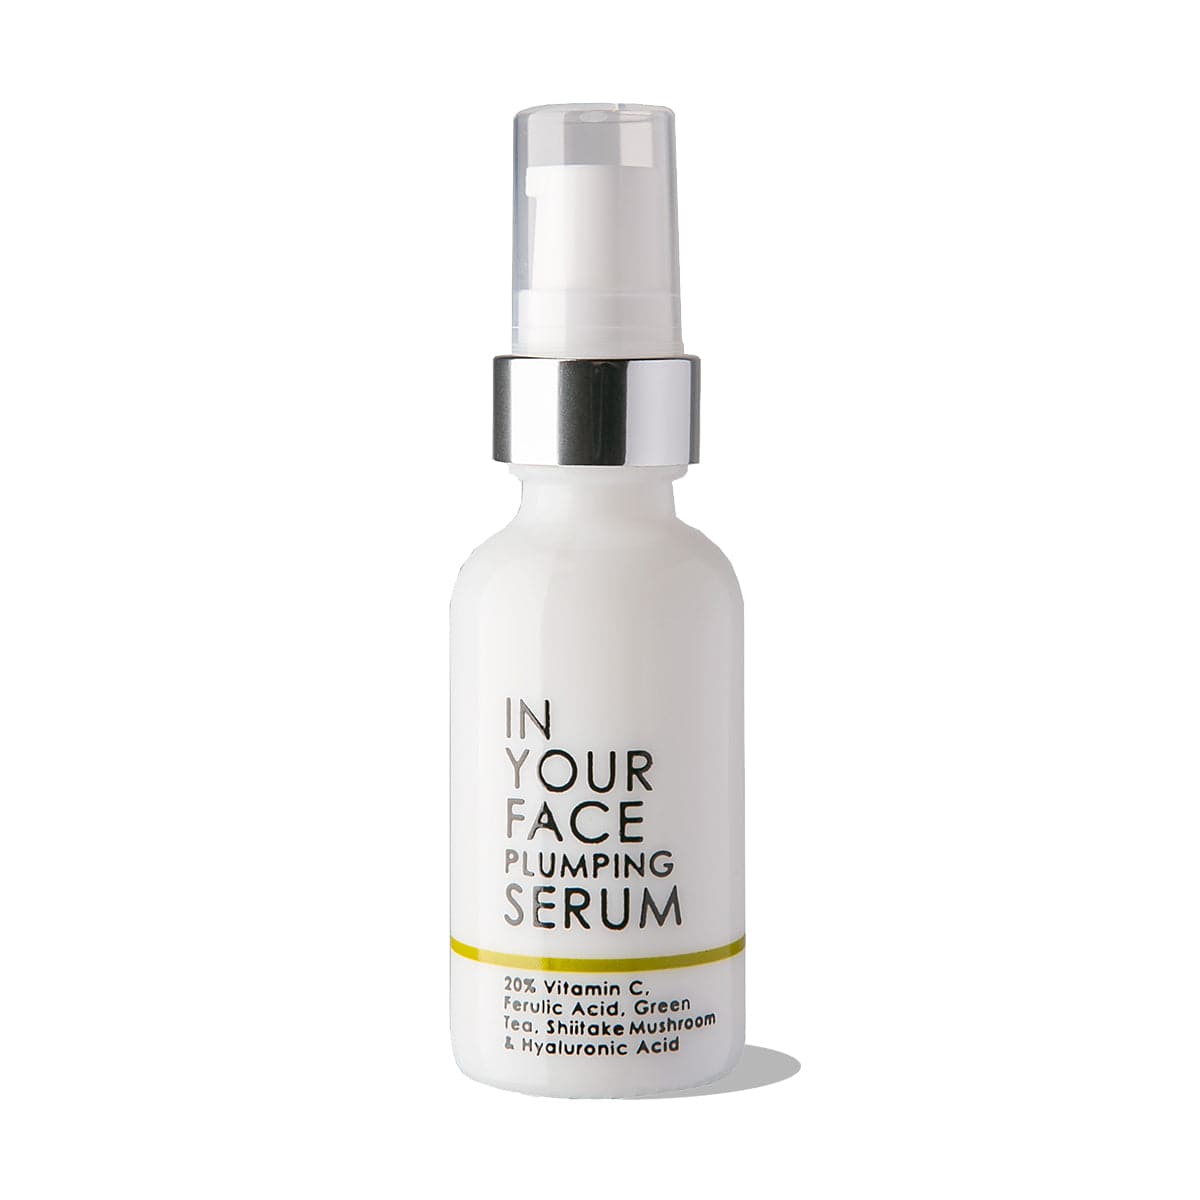 a clean image of our vitamin c plumping serum on a white background with a small shadow. The bottle saying: IN YOUR FACE PLUMPING SESRUM, 20% Vitamin C, Ferulic Acid, Green Tea, Shiitake Mushroom and Hyaluronic Acid